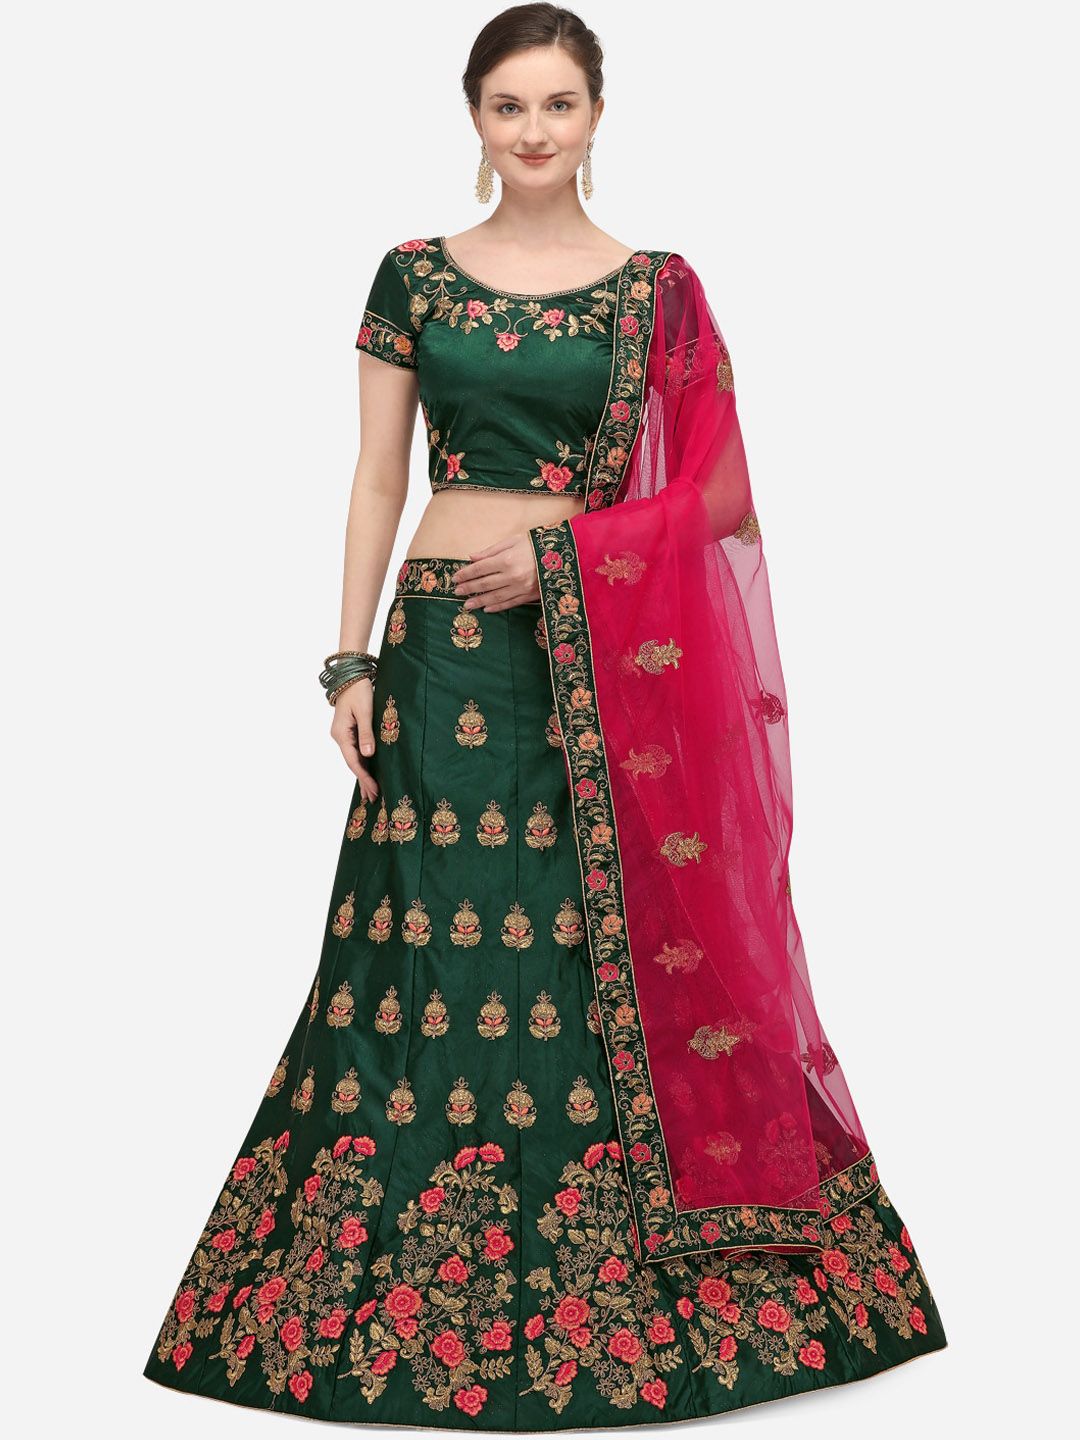 Netram Green & Pink Embroidered Semi-Stitched Lehenga & Unstitched Blouse with Dupatta Price in India